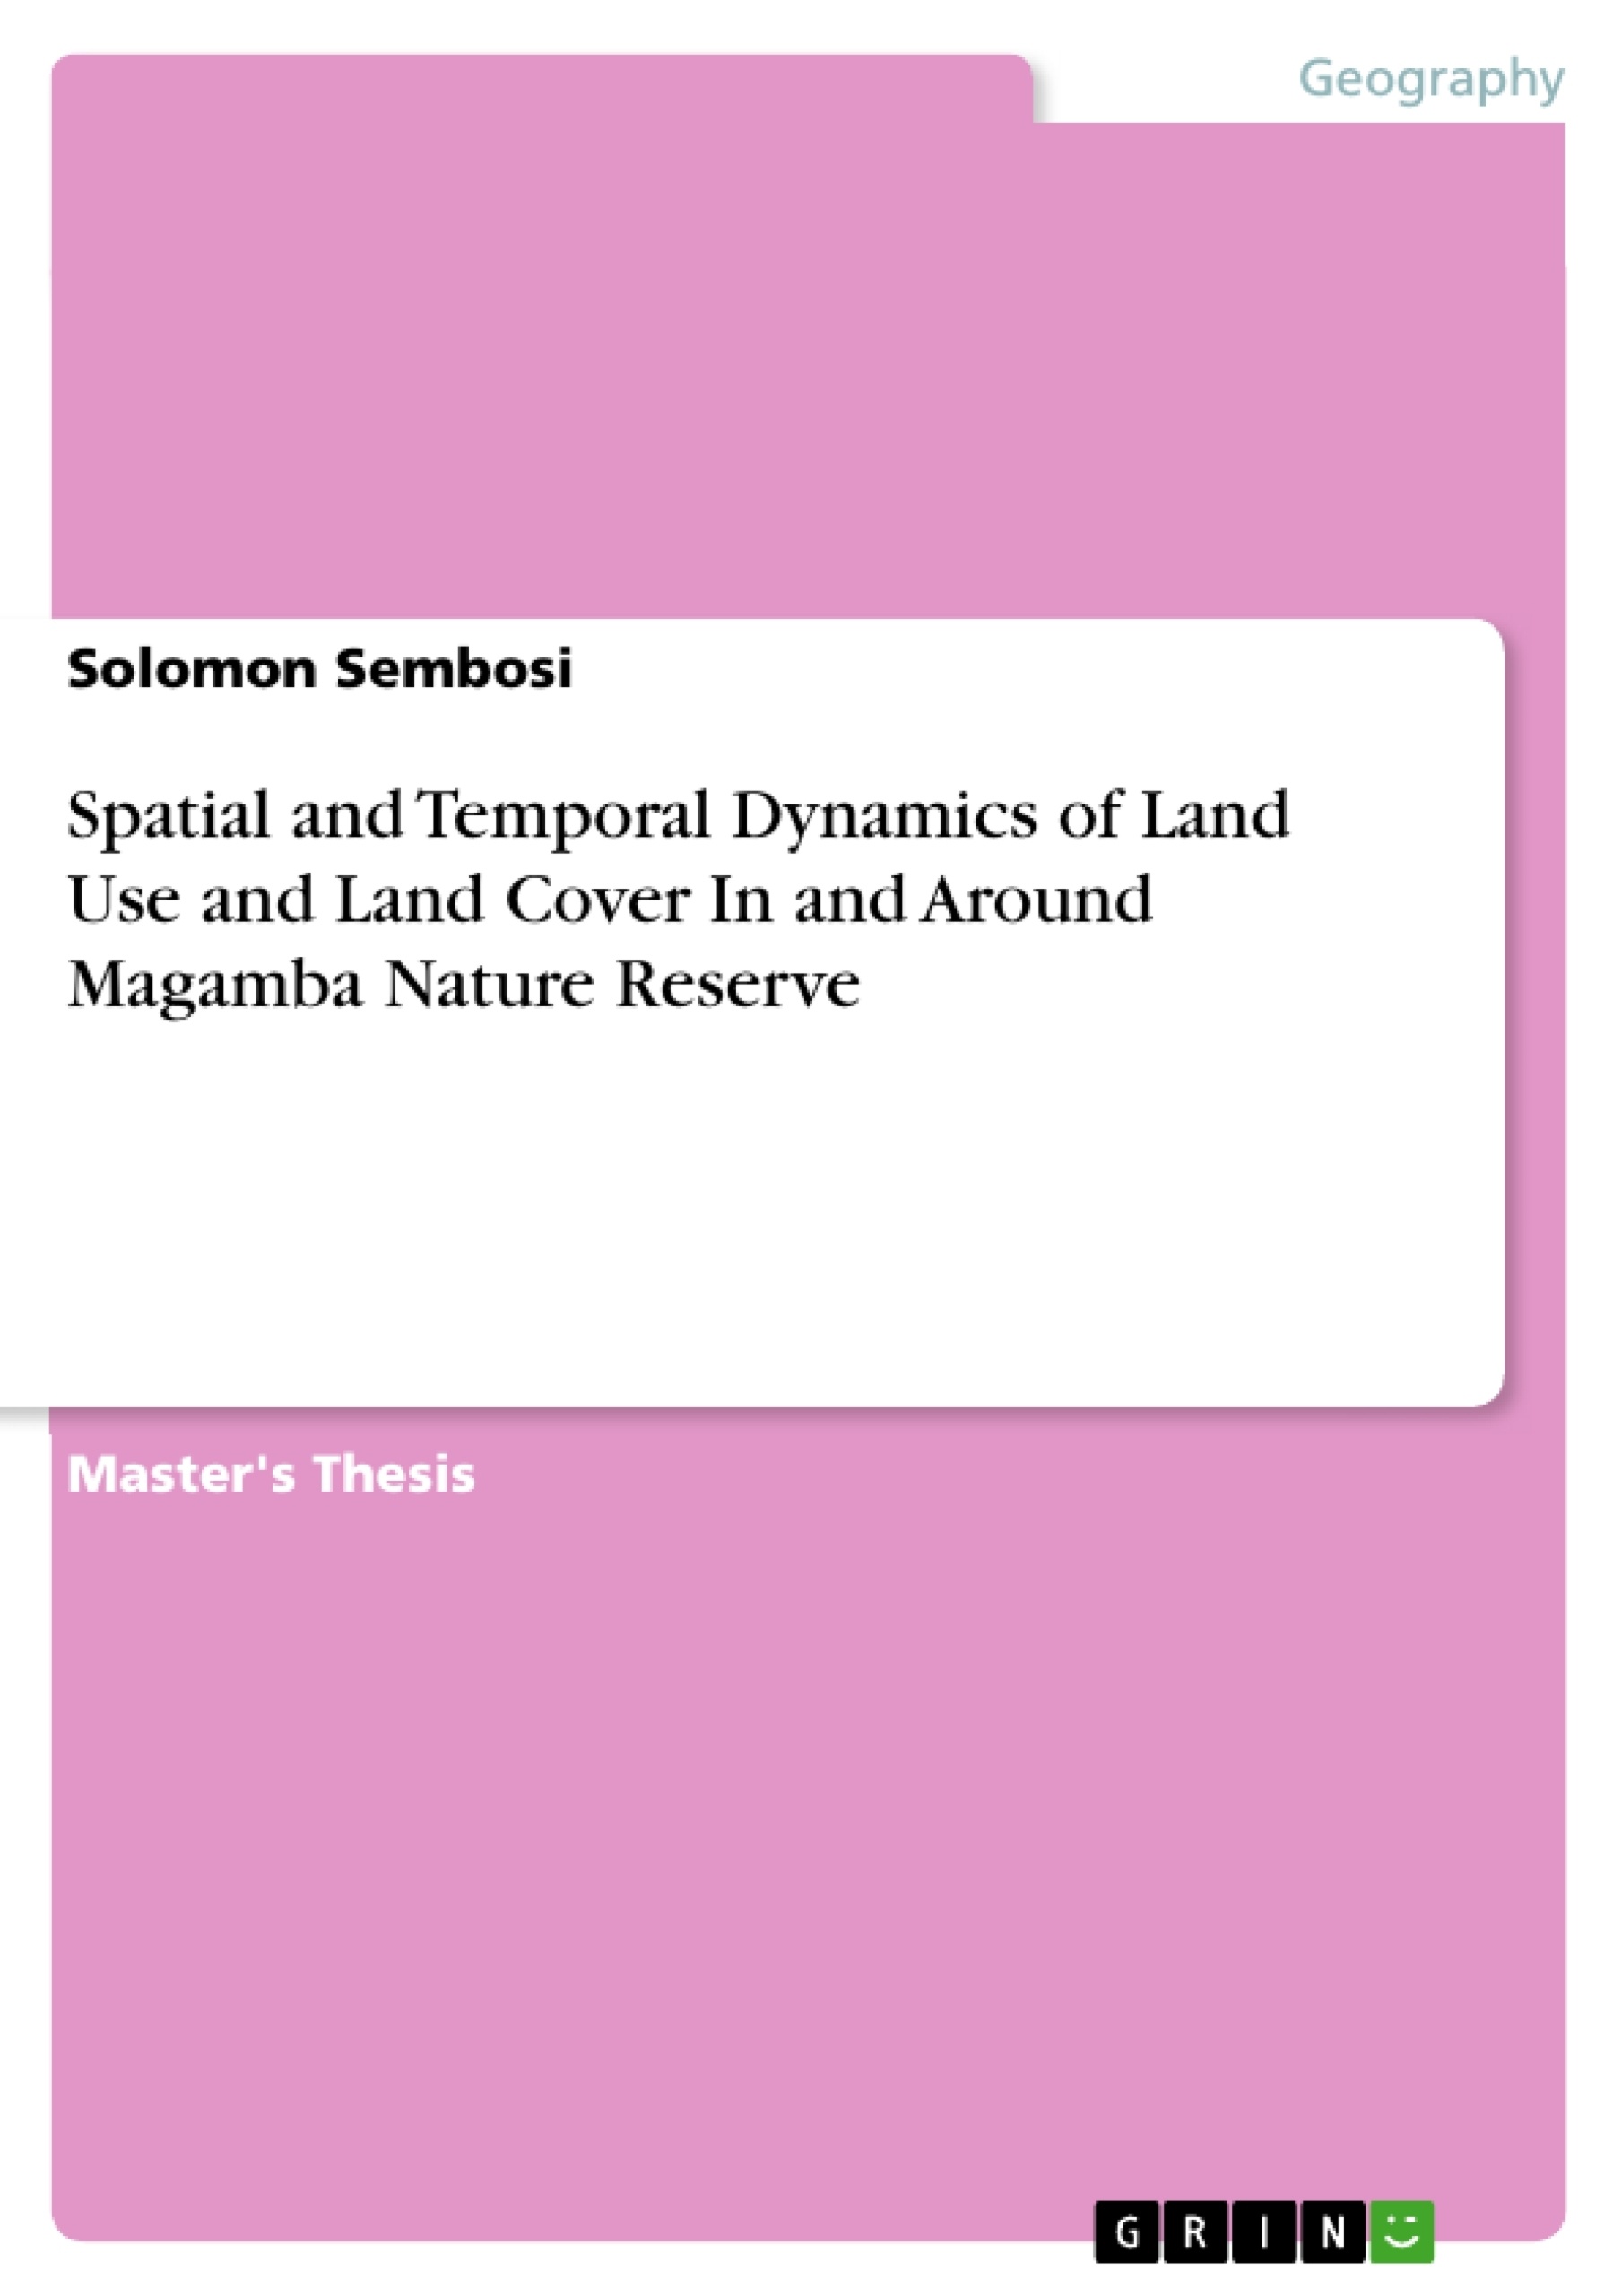 Título: Spatial and Temporal Dynamics of Land Use and Land Cover In and Around Magamba Nature Reserve